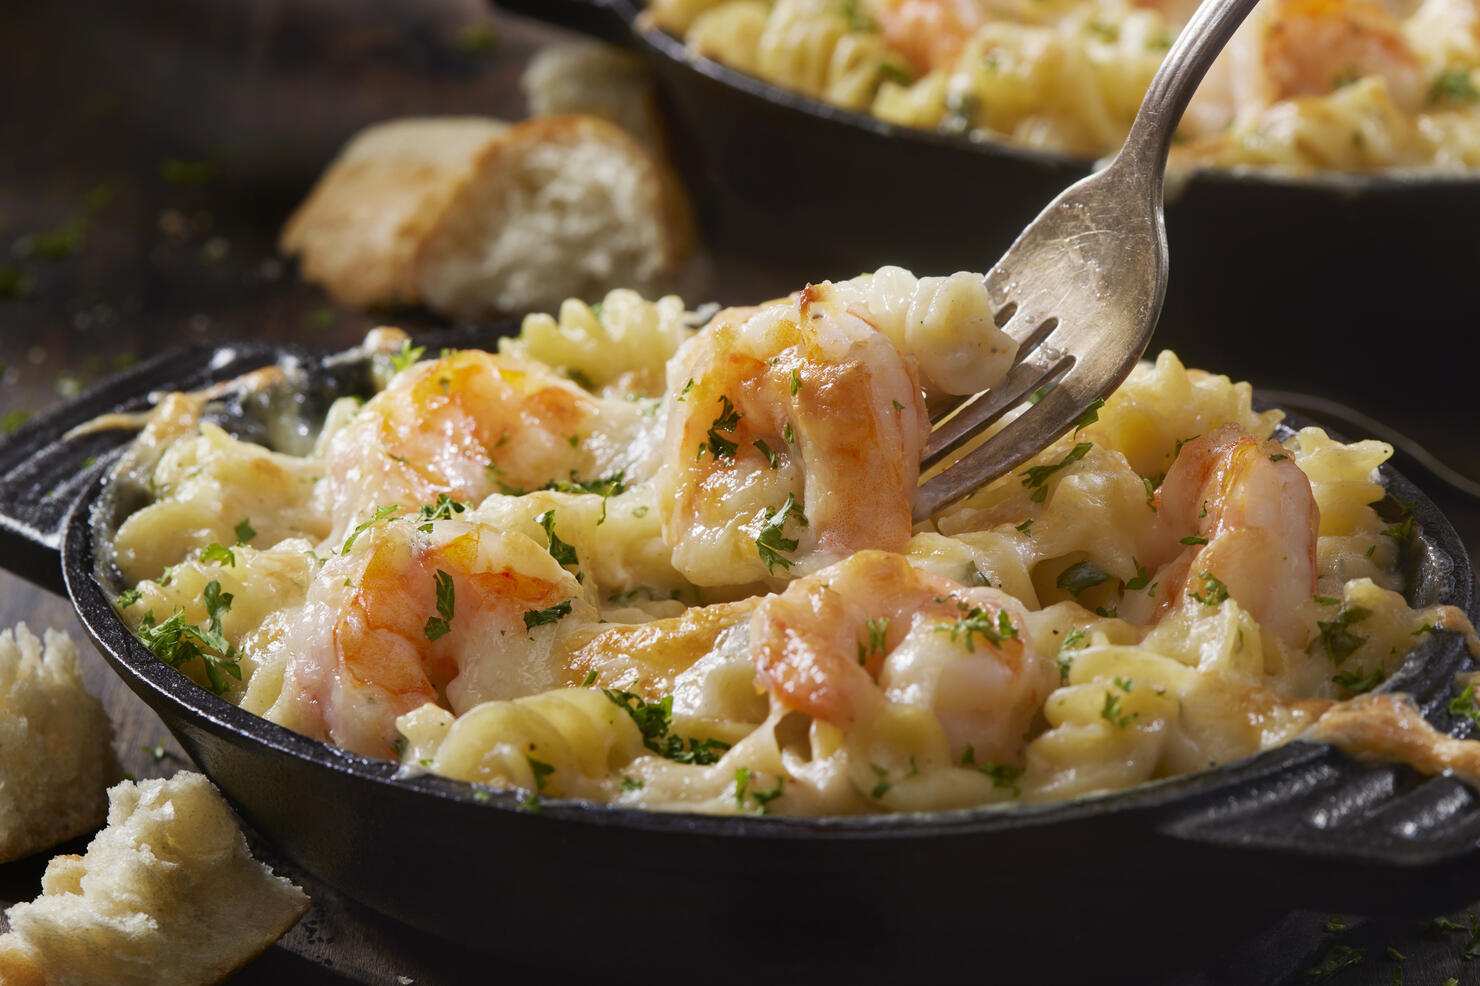 Baked Shrimp and Rotini in a Garlic White Wine Sauce